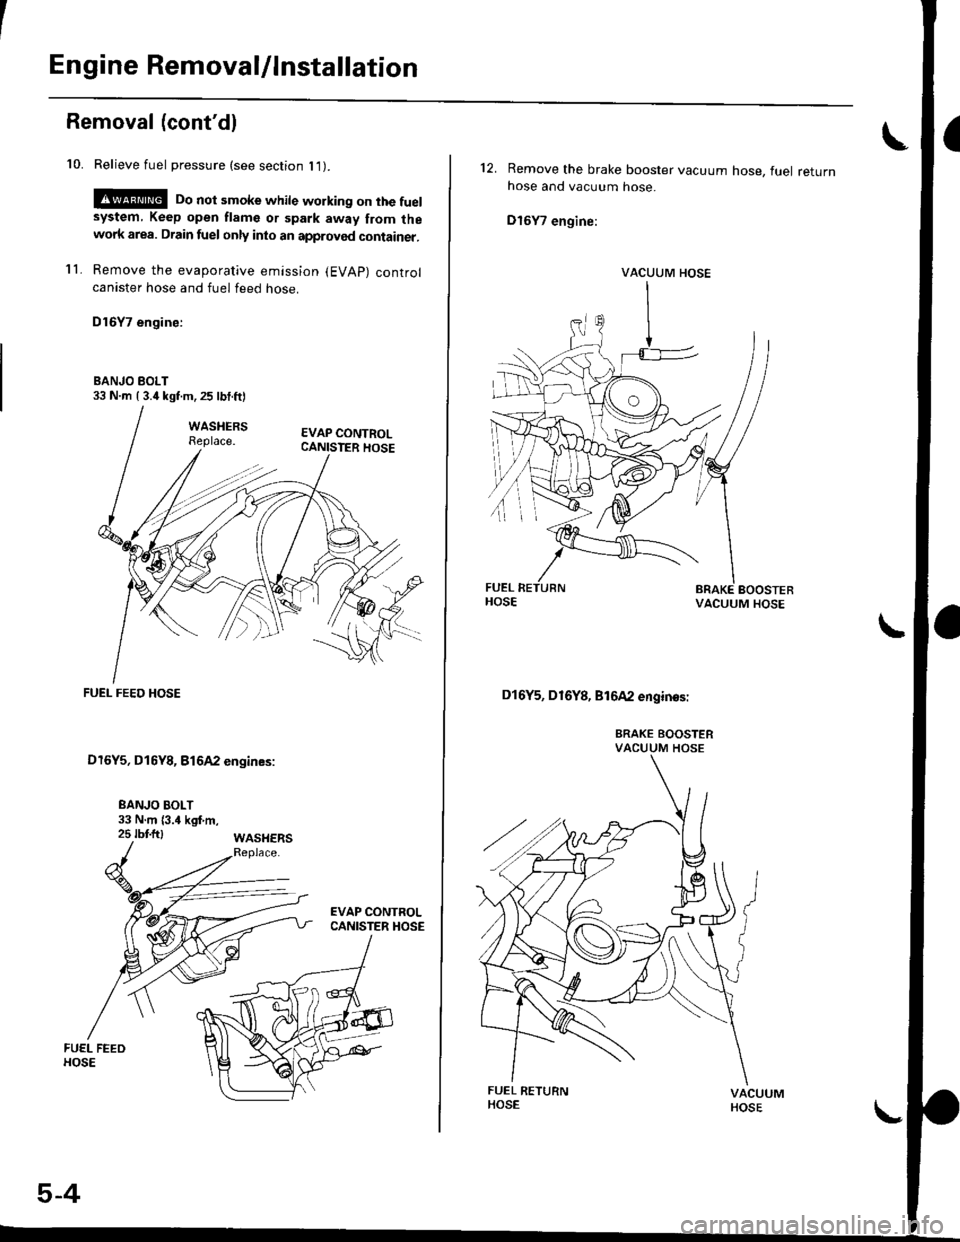 HONDA CIVIC 1996 6.G Service Manual Engine Removal/lnstallation
Removal (contdl
10. Relieve fuel pressure (see section l1).
!@ Do not smoke while working on the fuelsystem, Keep open flame or spark away from thewolk area. Drain fuel on